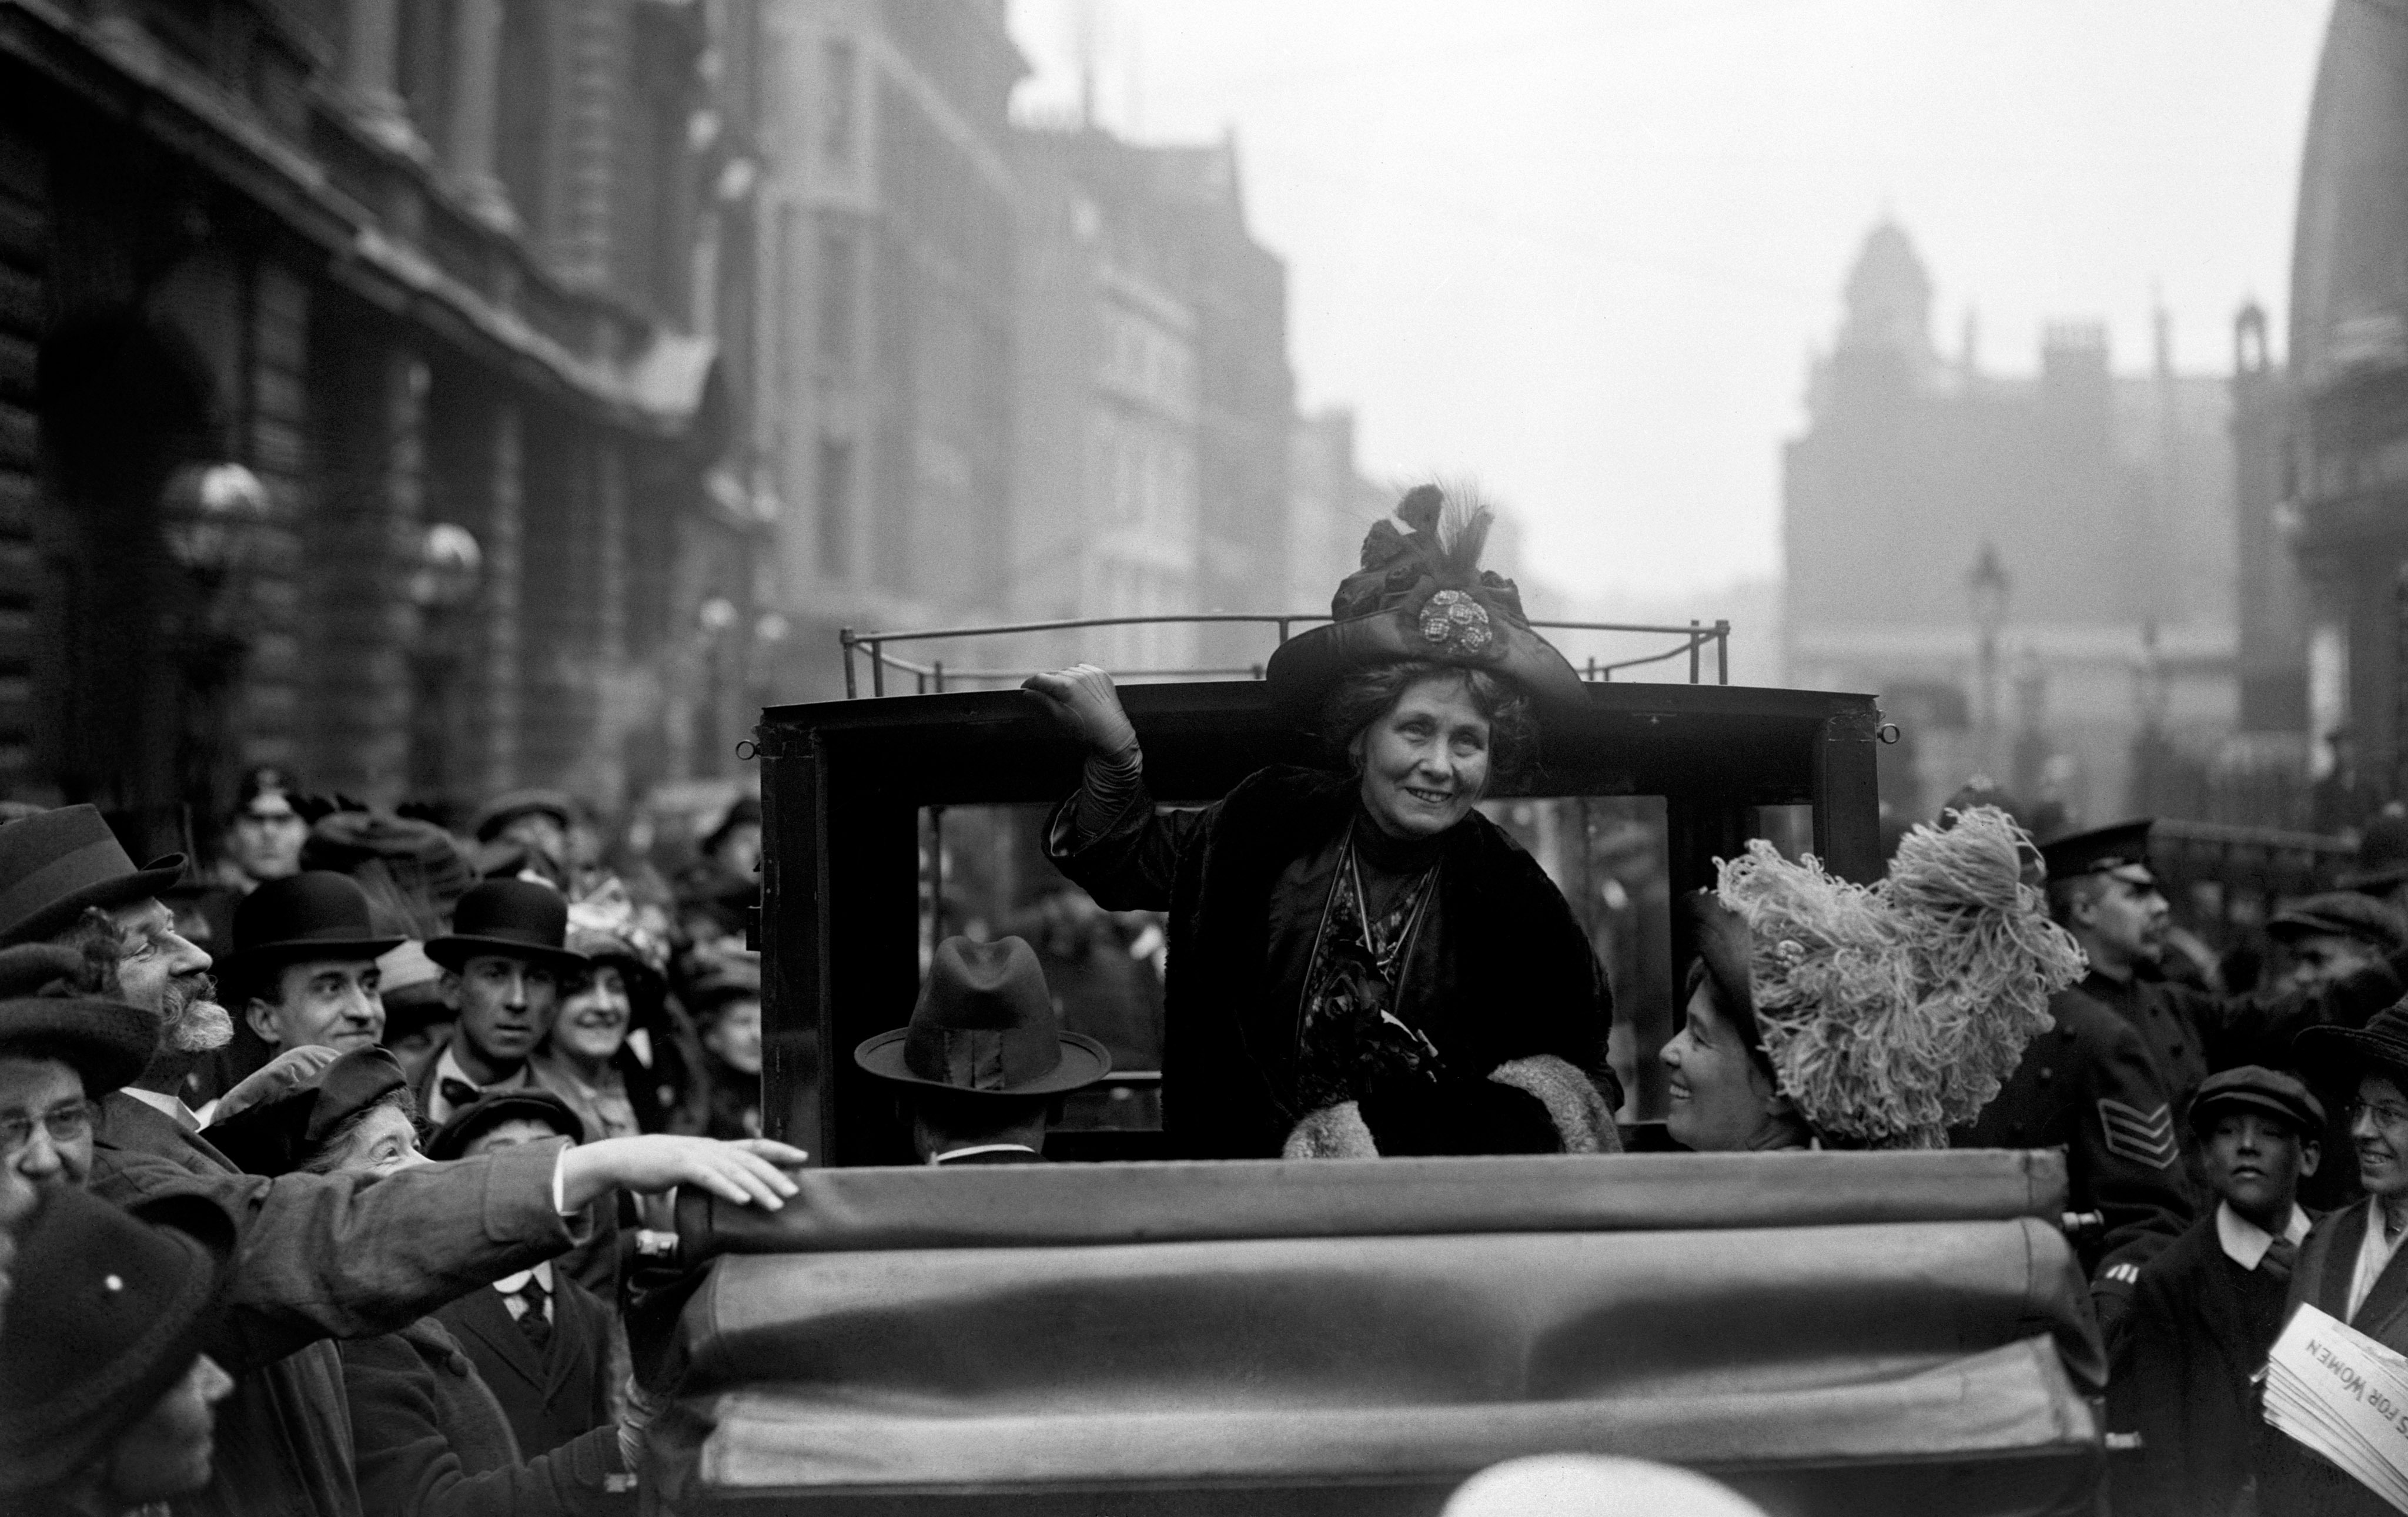 Woman smiling from the back of a carriage, with crowds of onlookers 